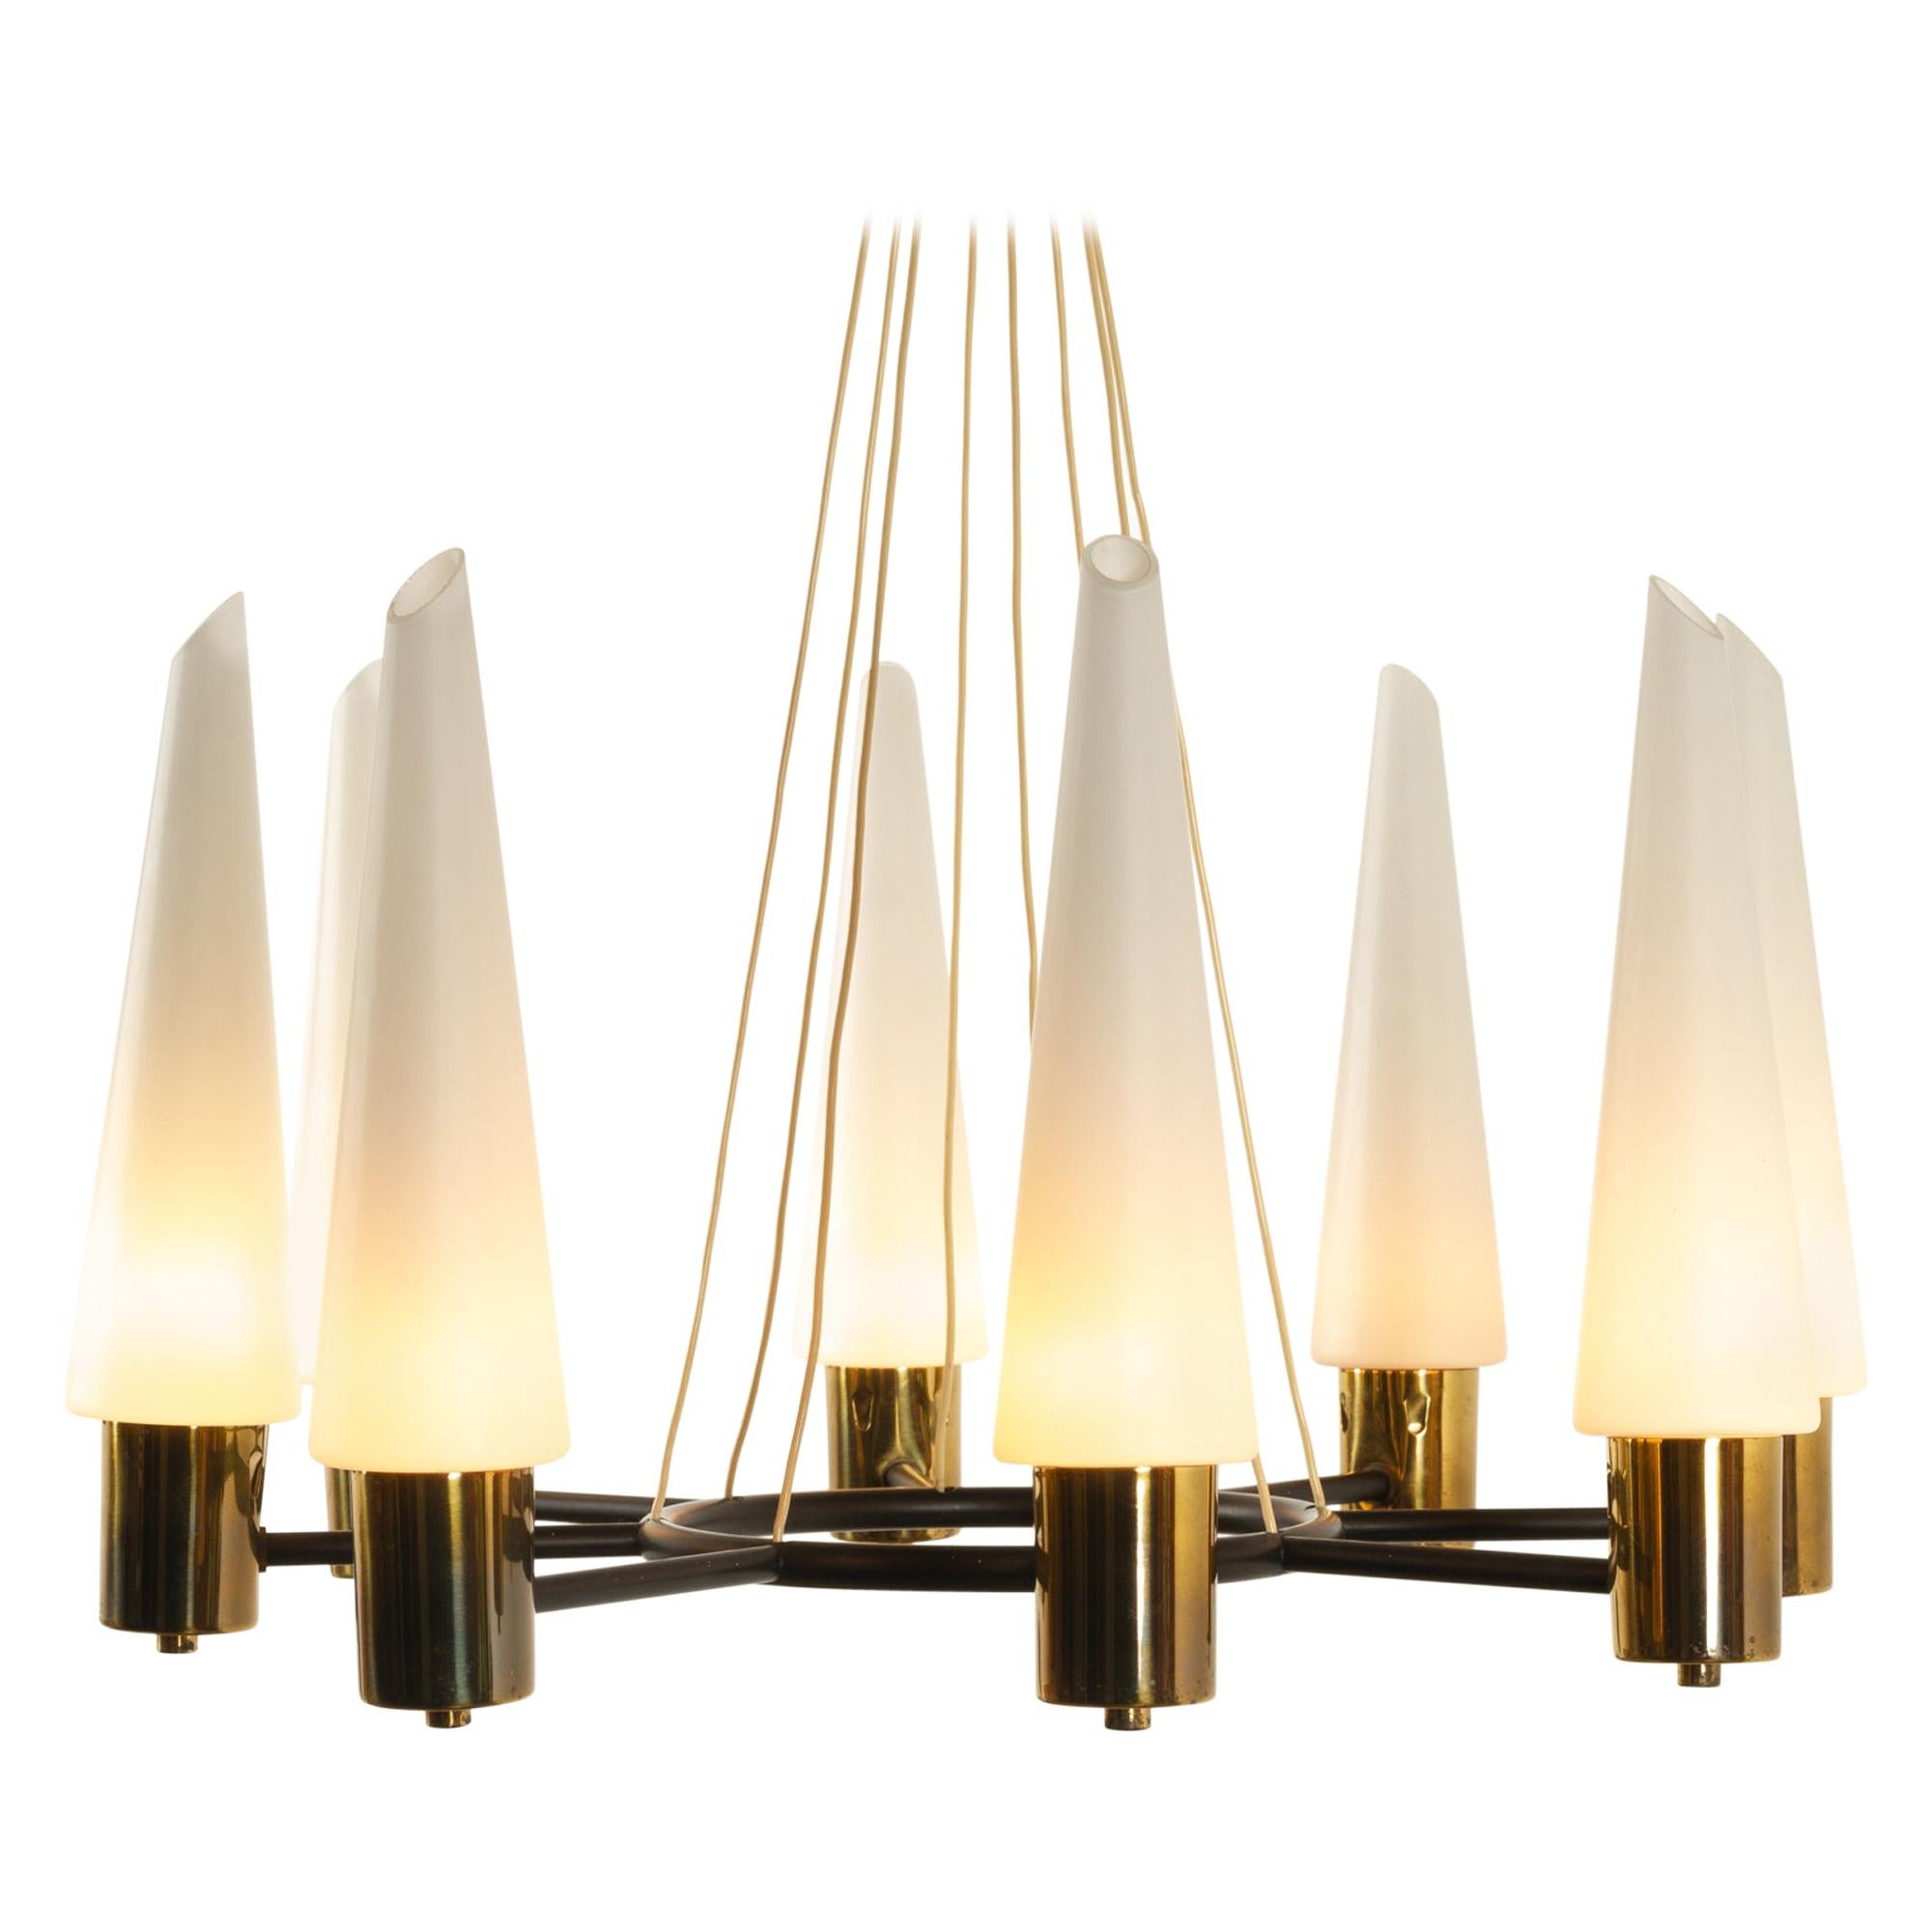 Vintage Midcentury Brass Chandelier with Opal Glass Shades, 1960s For Sale